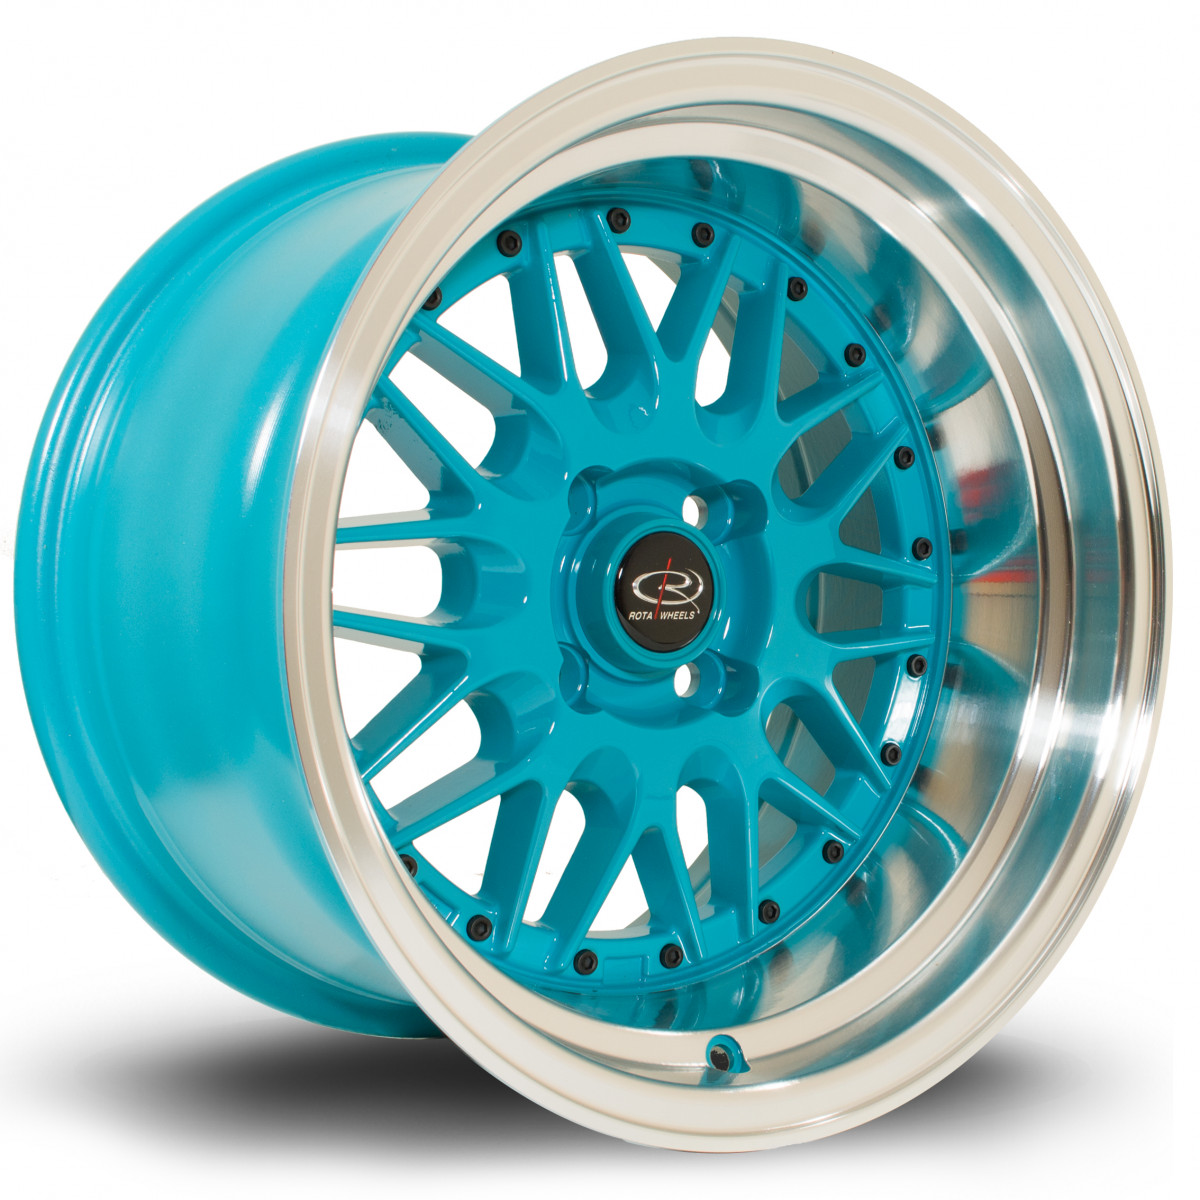 Kensei 15x9 4x100 ET0 Teal with Polished Lip